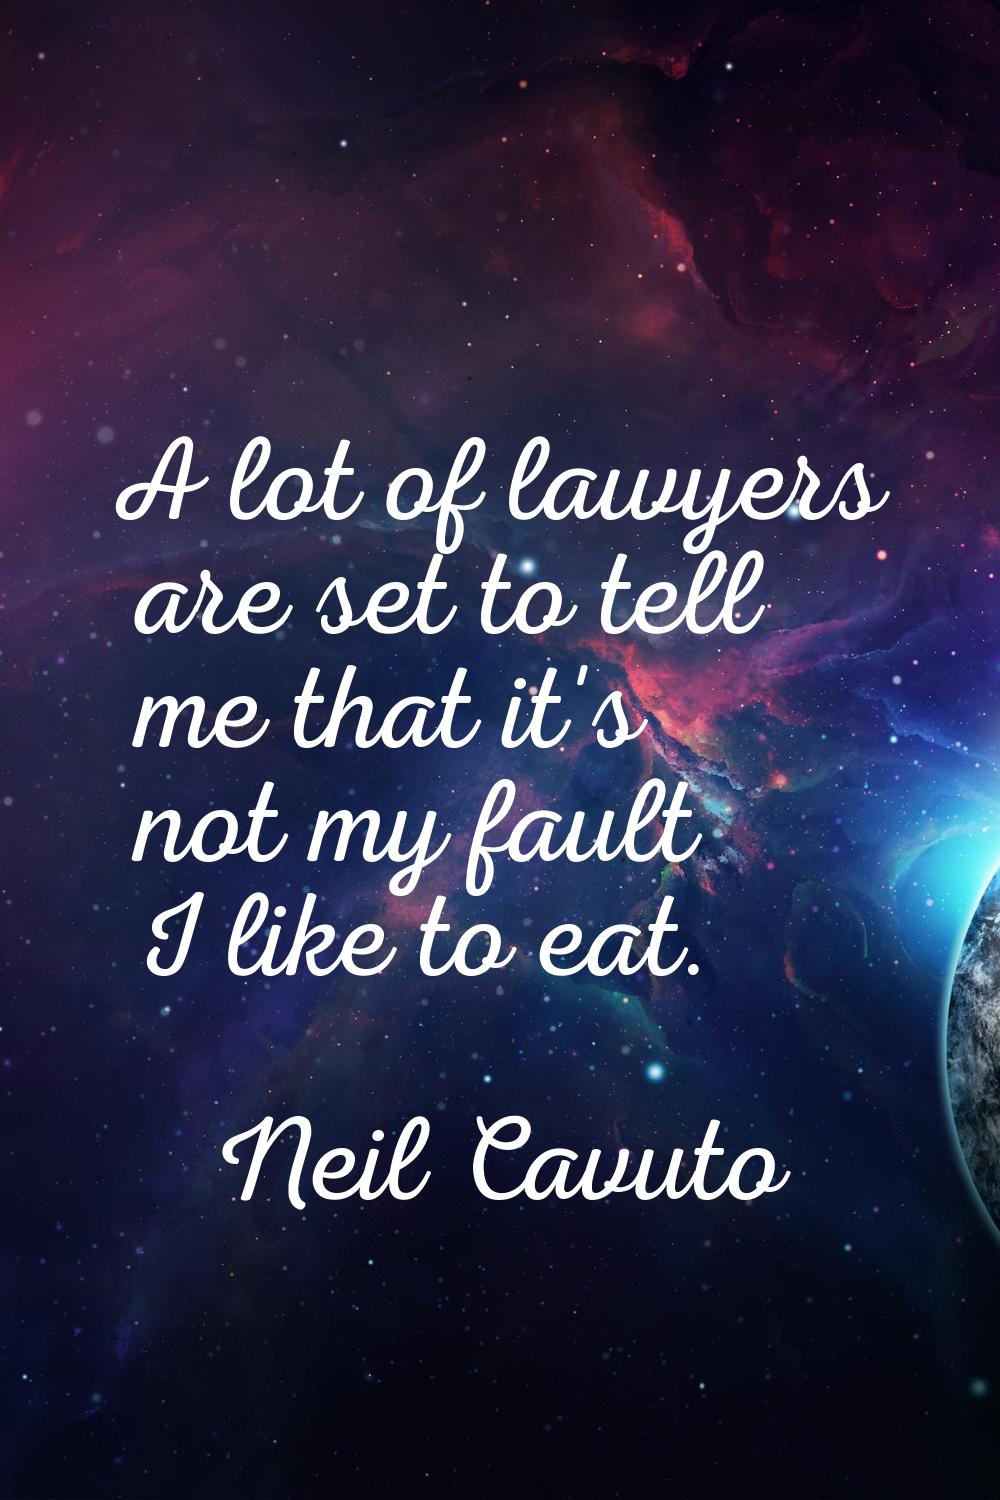 A lot of lawyers are set to tell me that it's not my fault I like to eat.